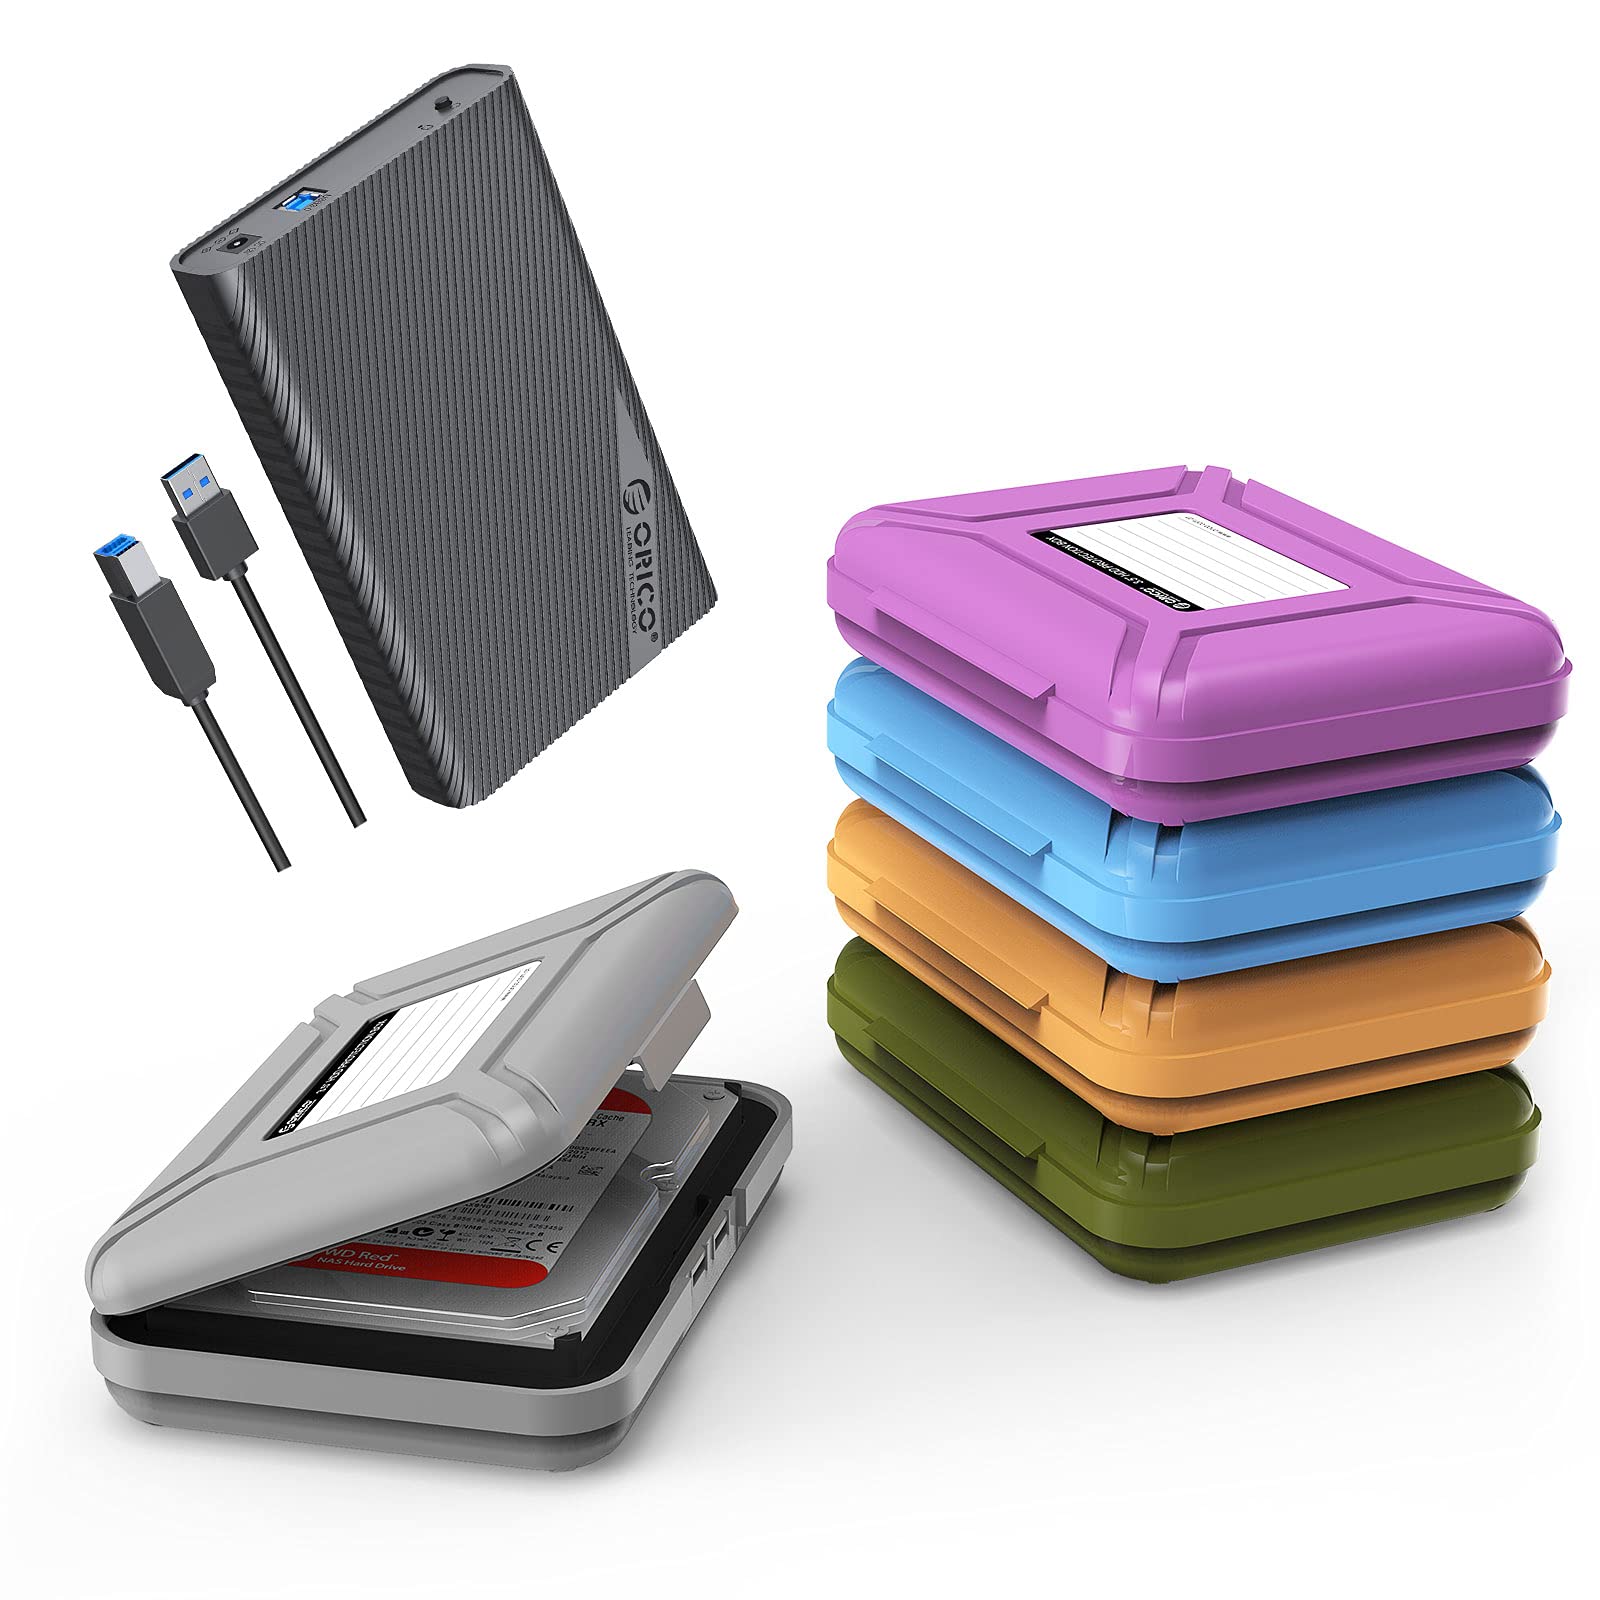 External hard disk with protective case